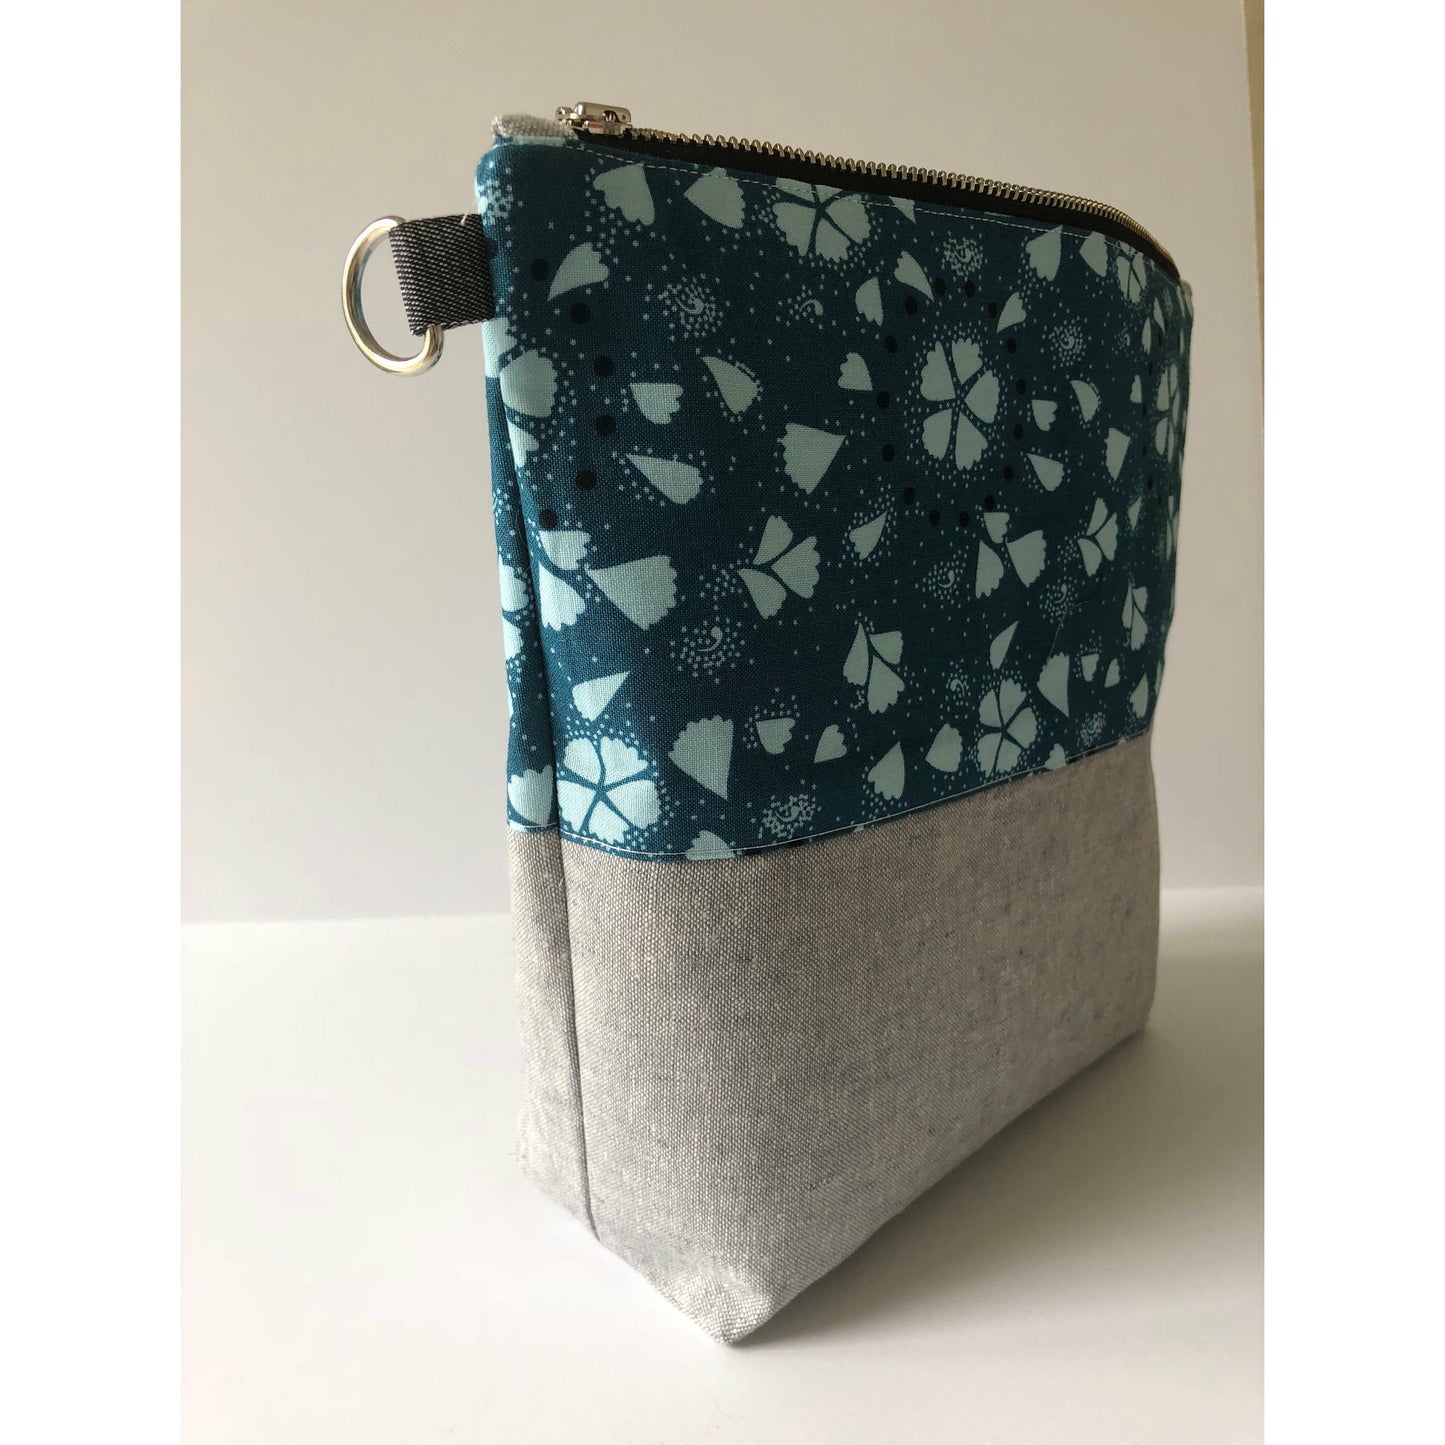 Bucket Knitting Bags, Cinch Project Bags – kmaccollbags